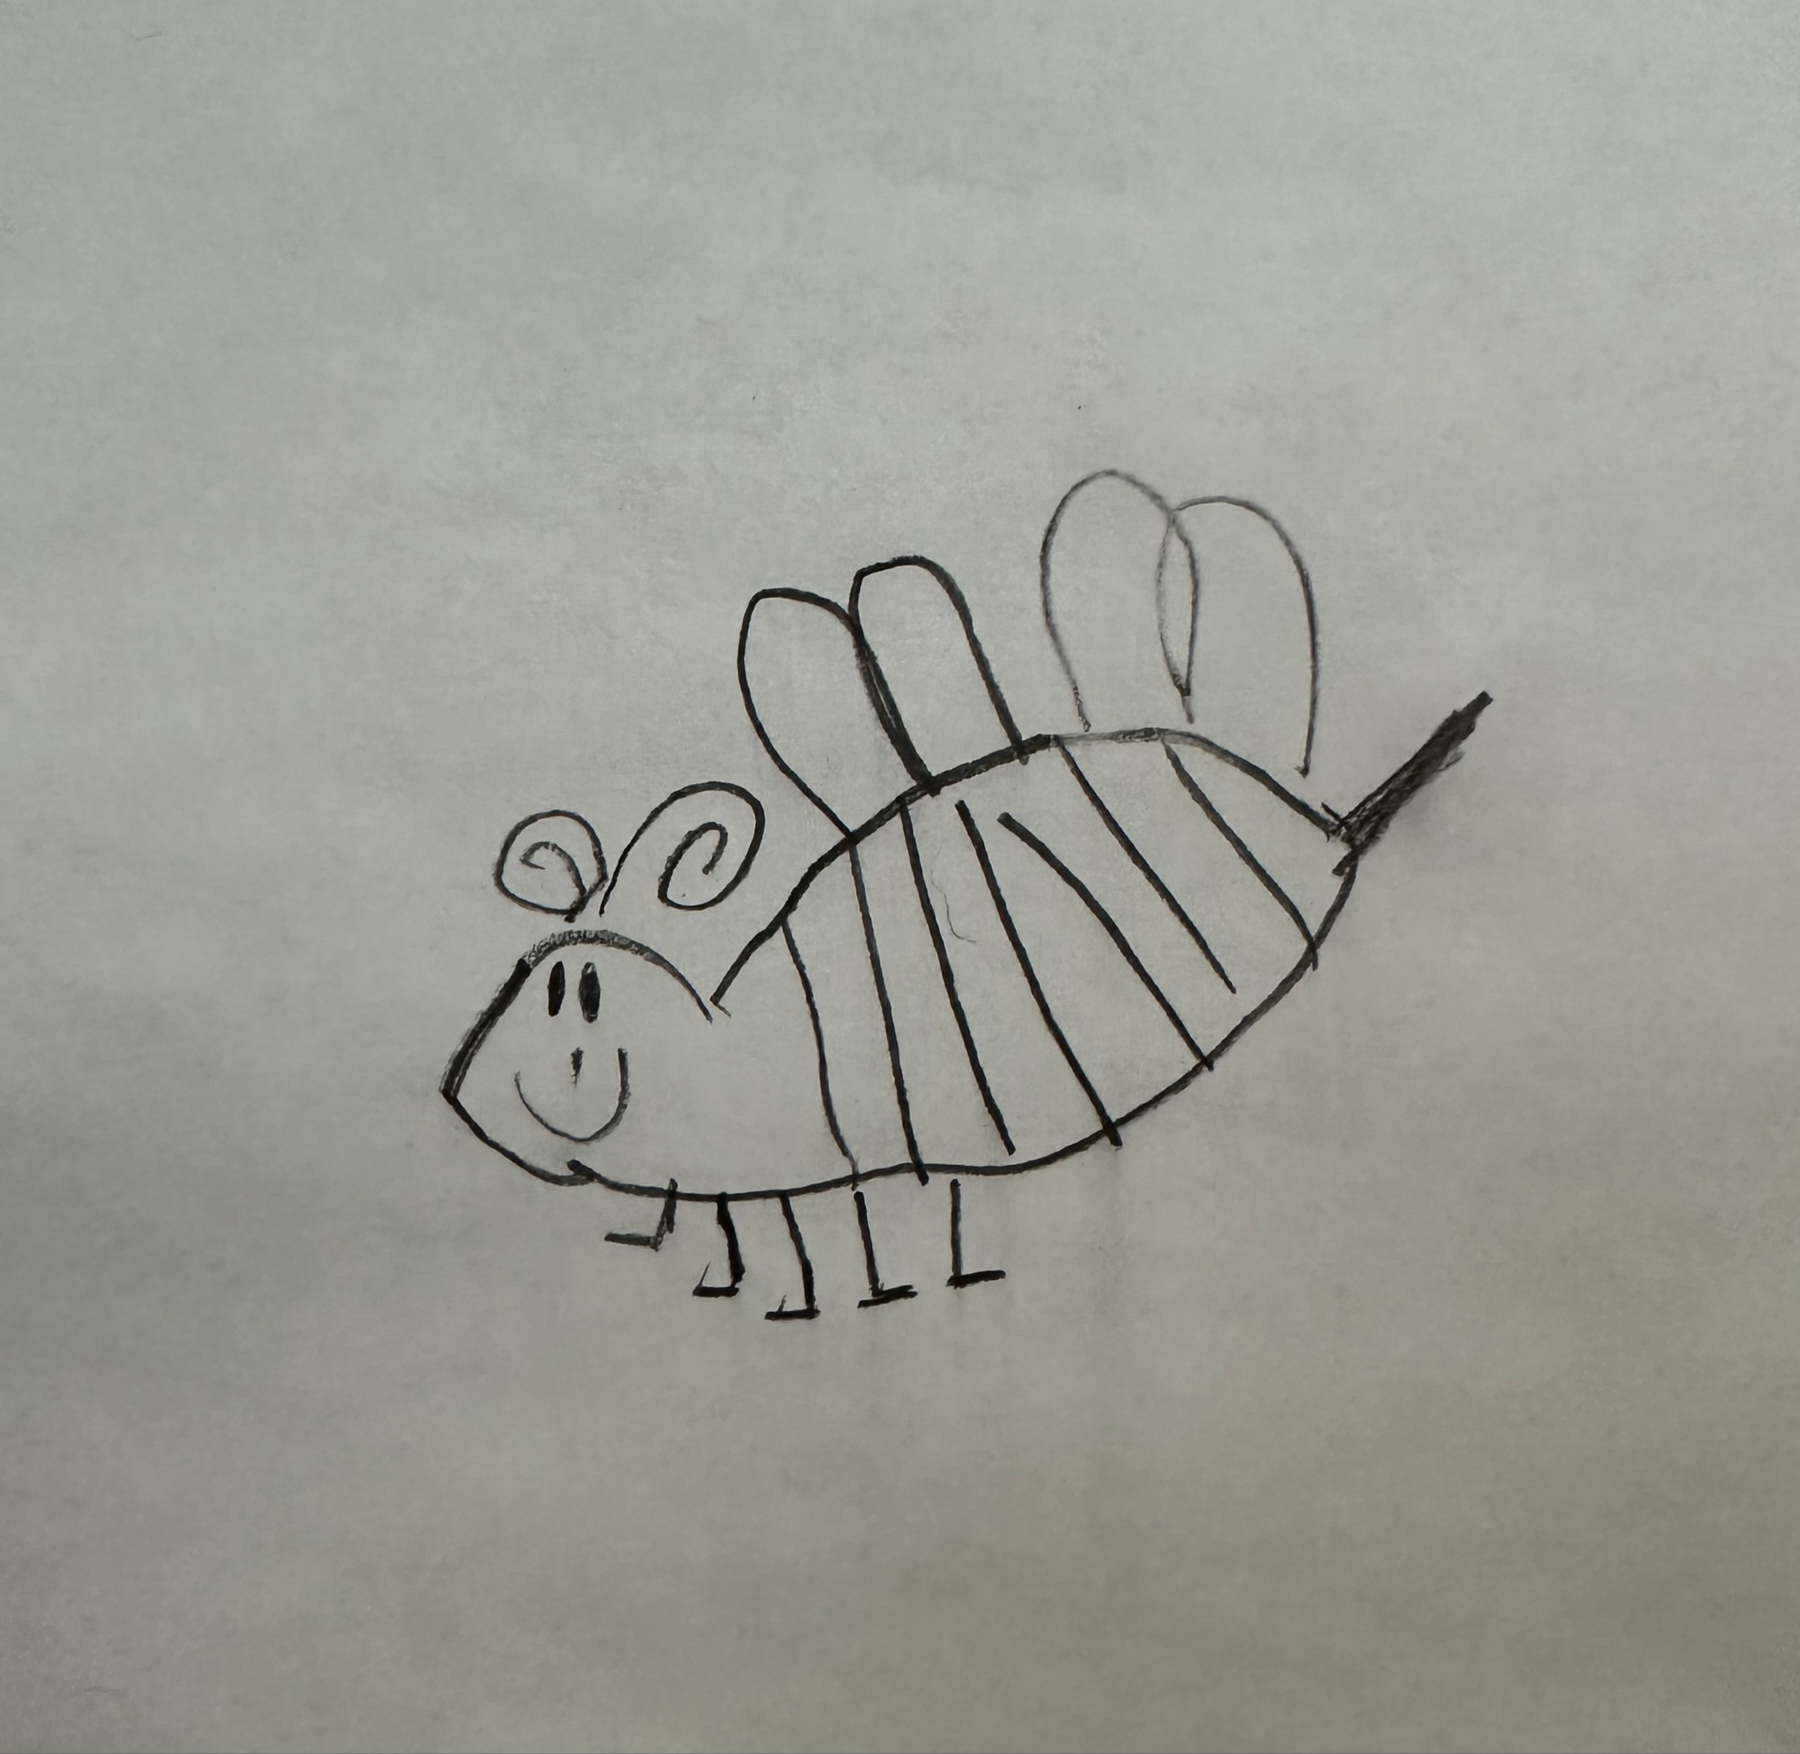 A hand-drawn sketch of a whimsical, cartoon-like bee with striped body and stylized wings.